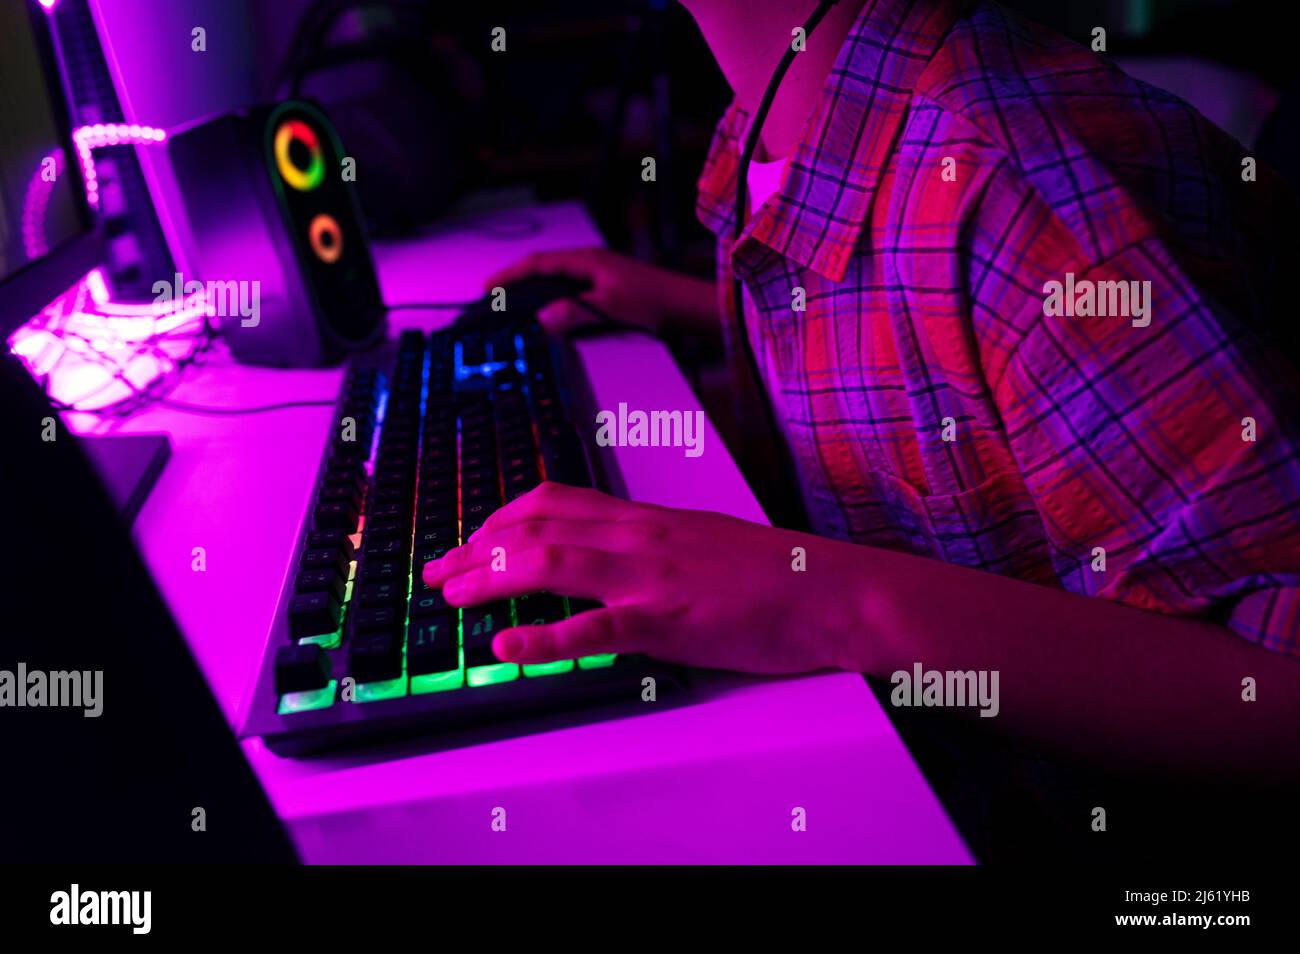 Boy with computer keyboard playing game sitting at table Stock Photo